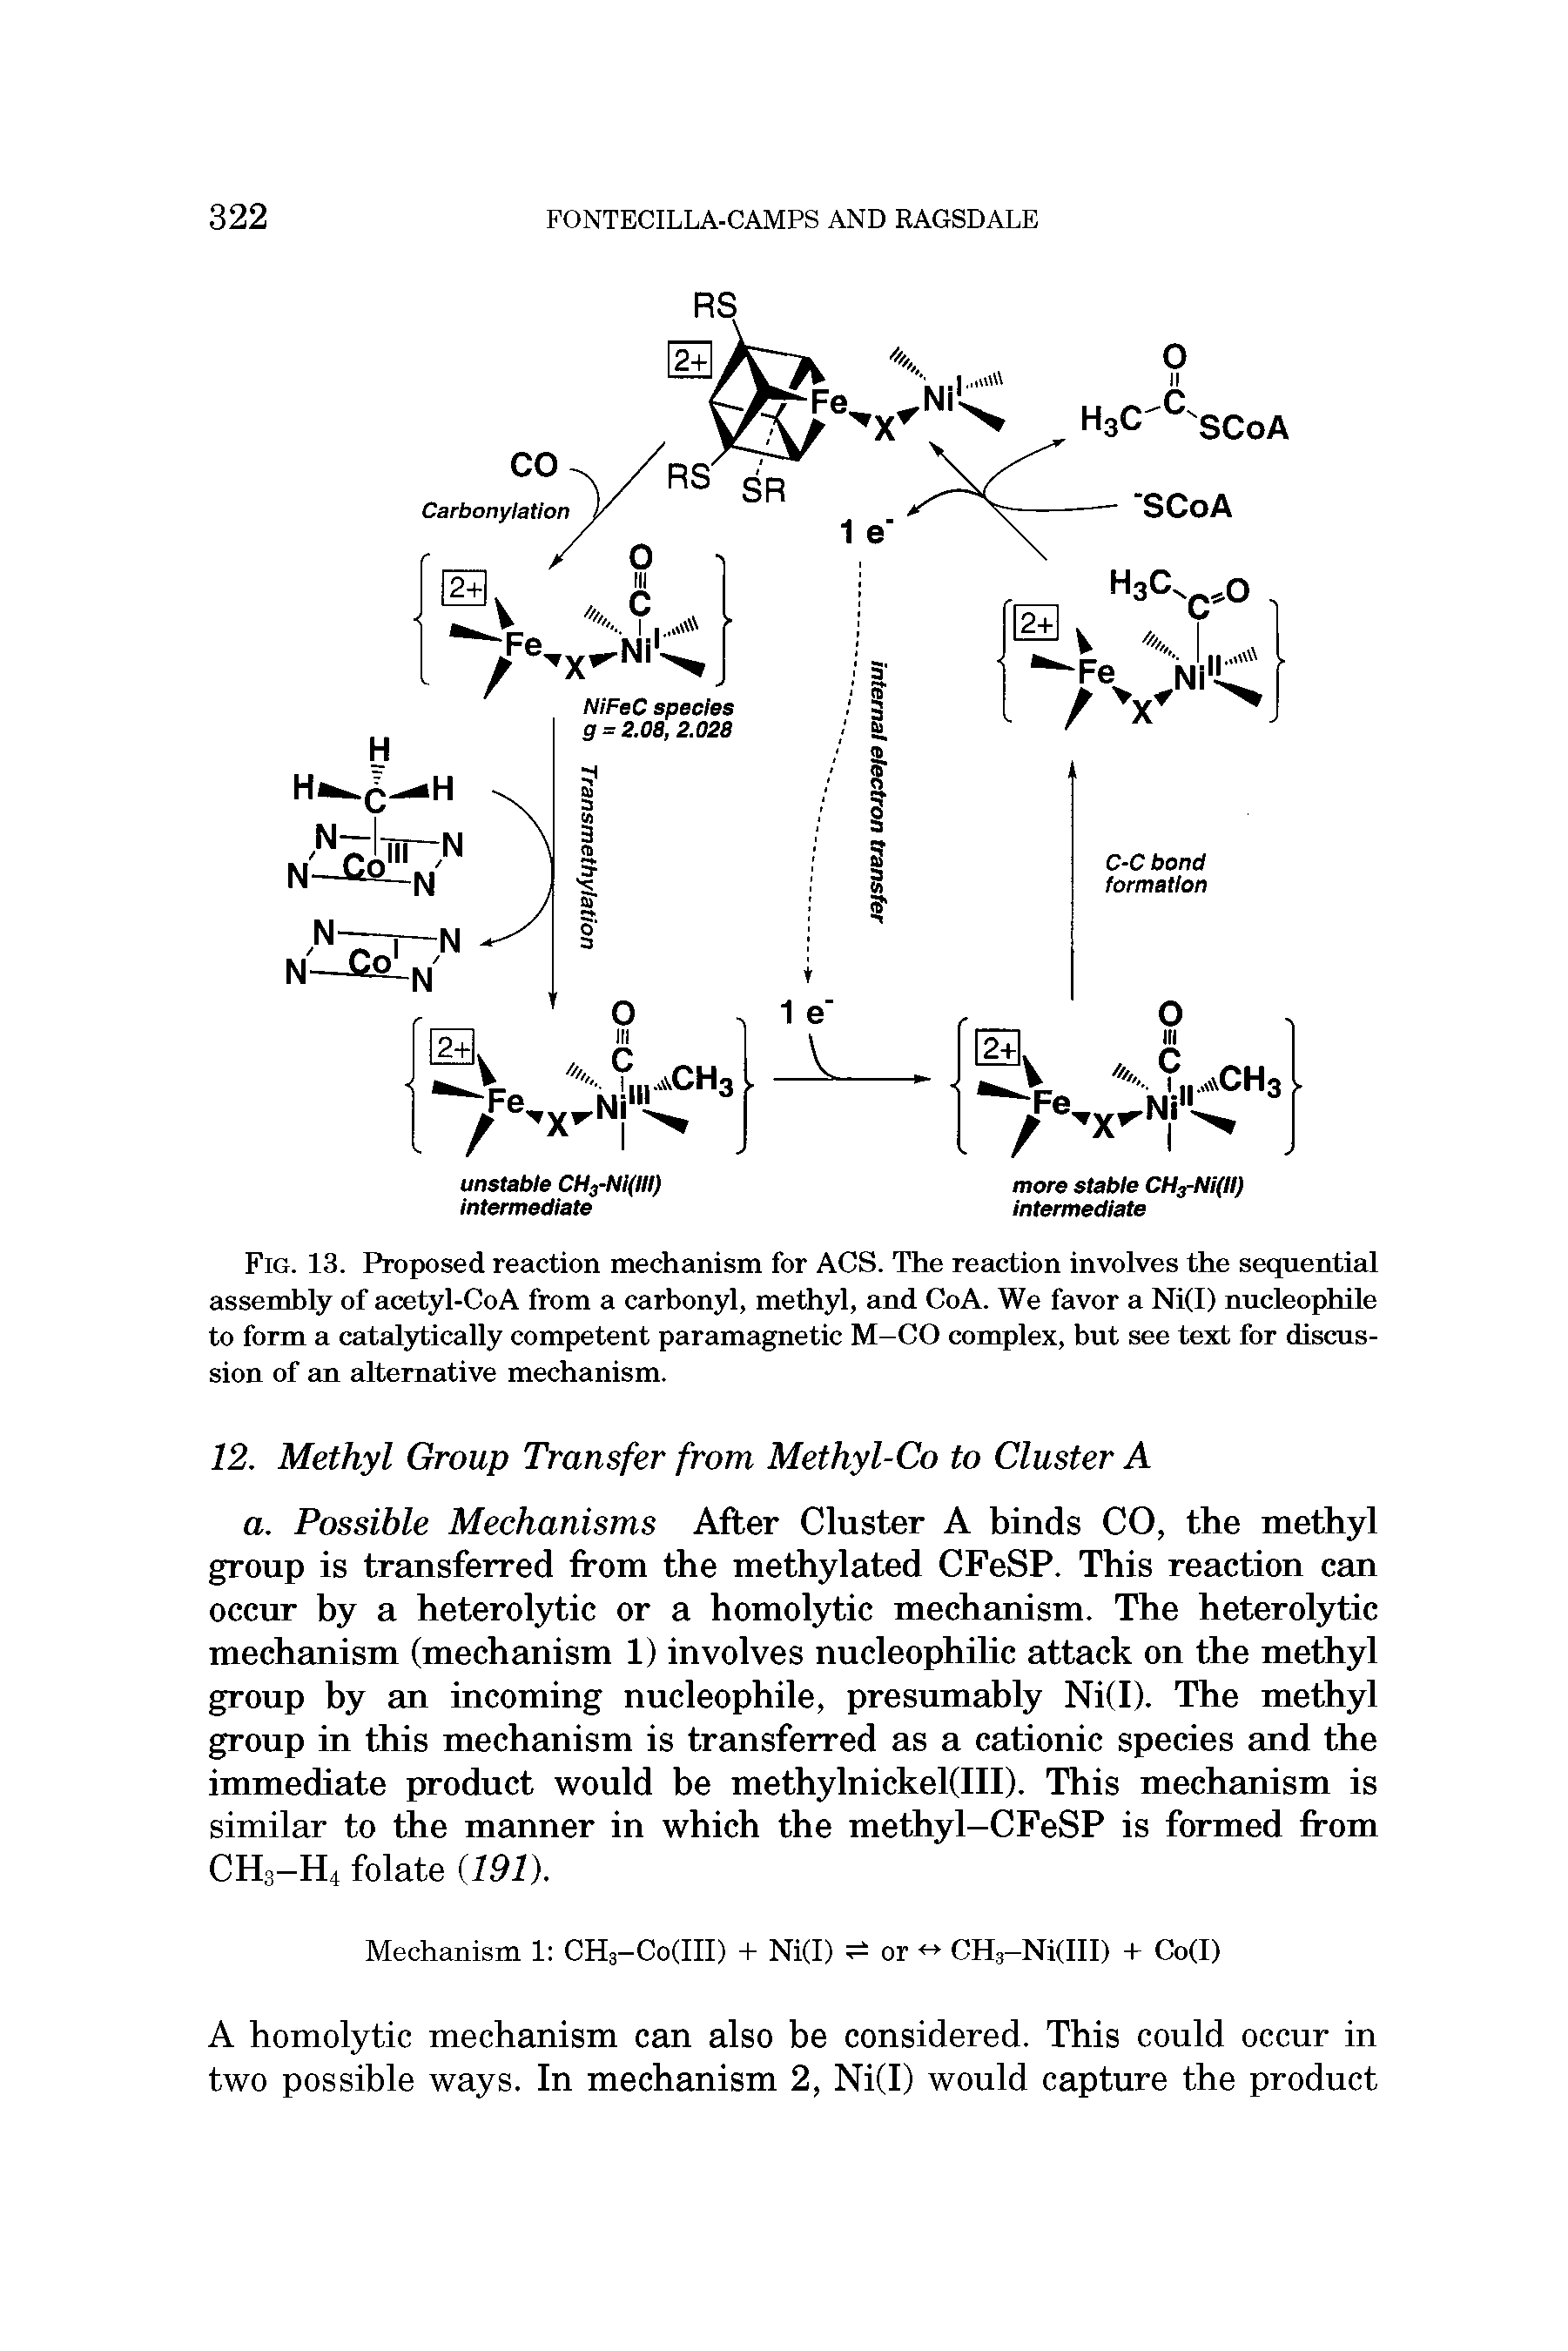 Fig. 13. Proposed reaction mechanism for ACS. The reaction involves the sequential assembly of acetyl-CoA from a carbonyl, methyl, and CoA. We favor a Ni(l) nucleophile to form a catEdytically competent paramagnetic M-CO complex, but see text for discussion of Em alternative mechanism.